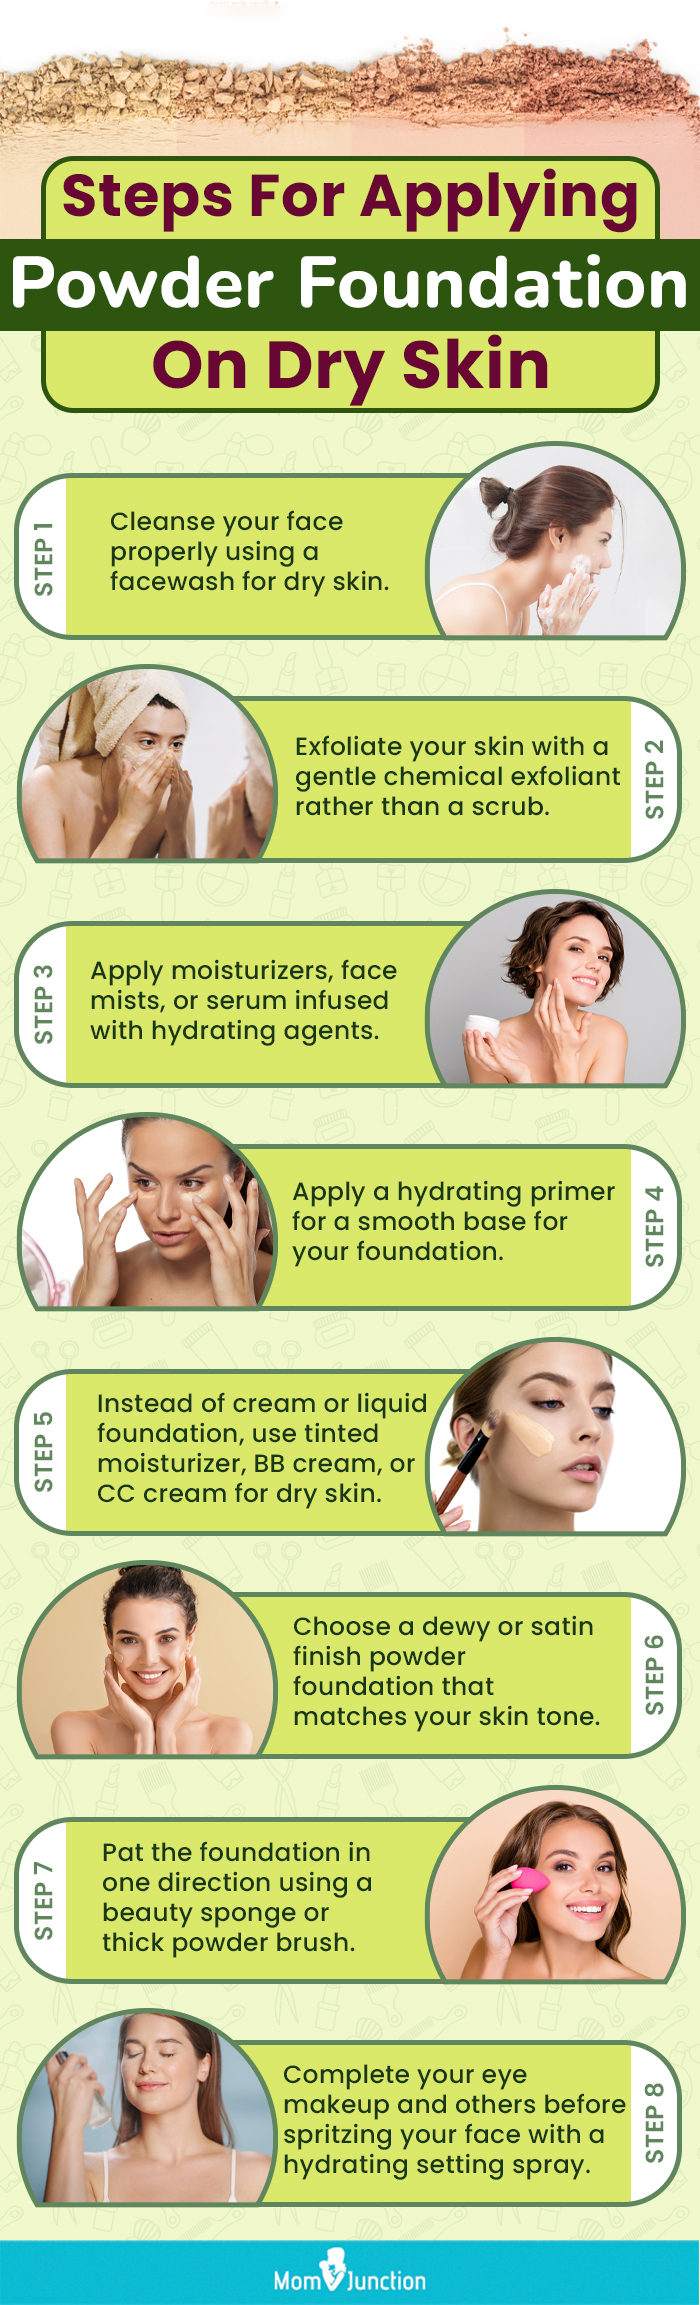 Steps For Applying Powder Foundation On Dry Skin (infographic)